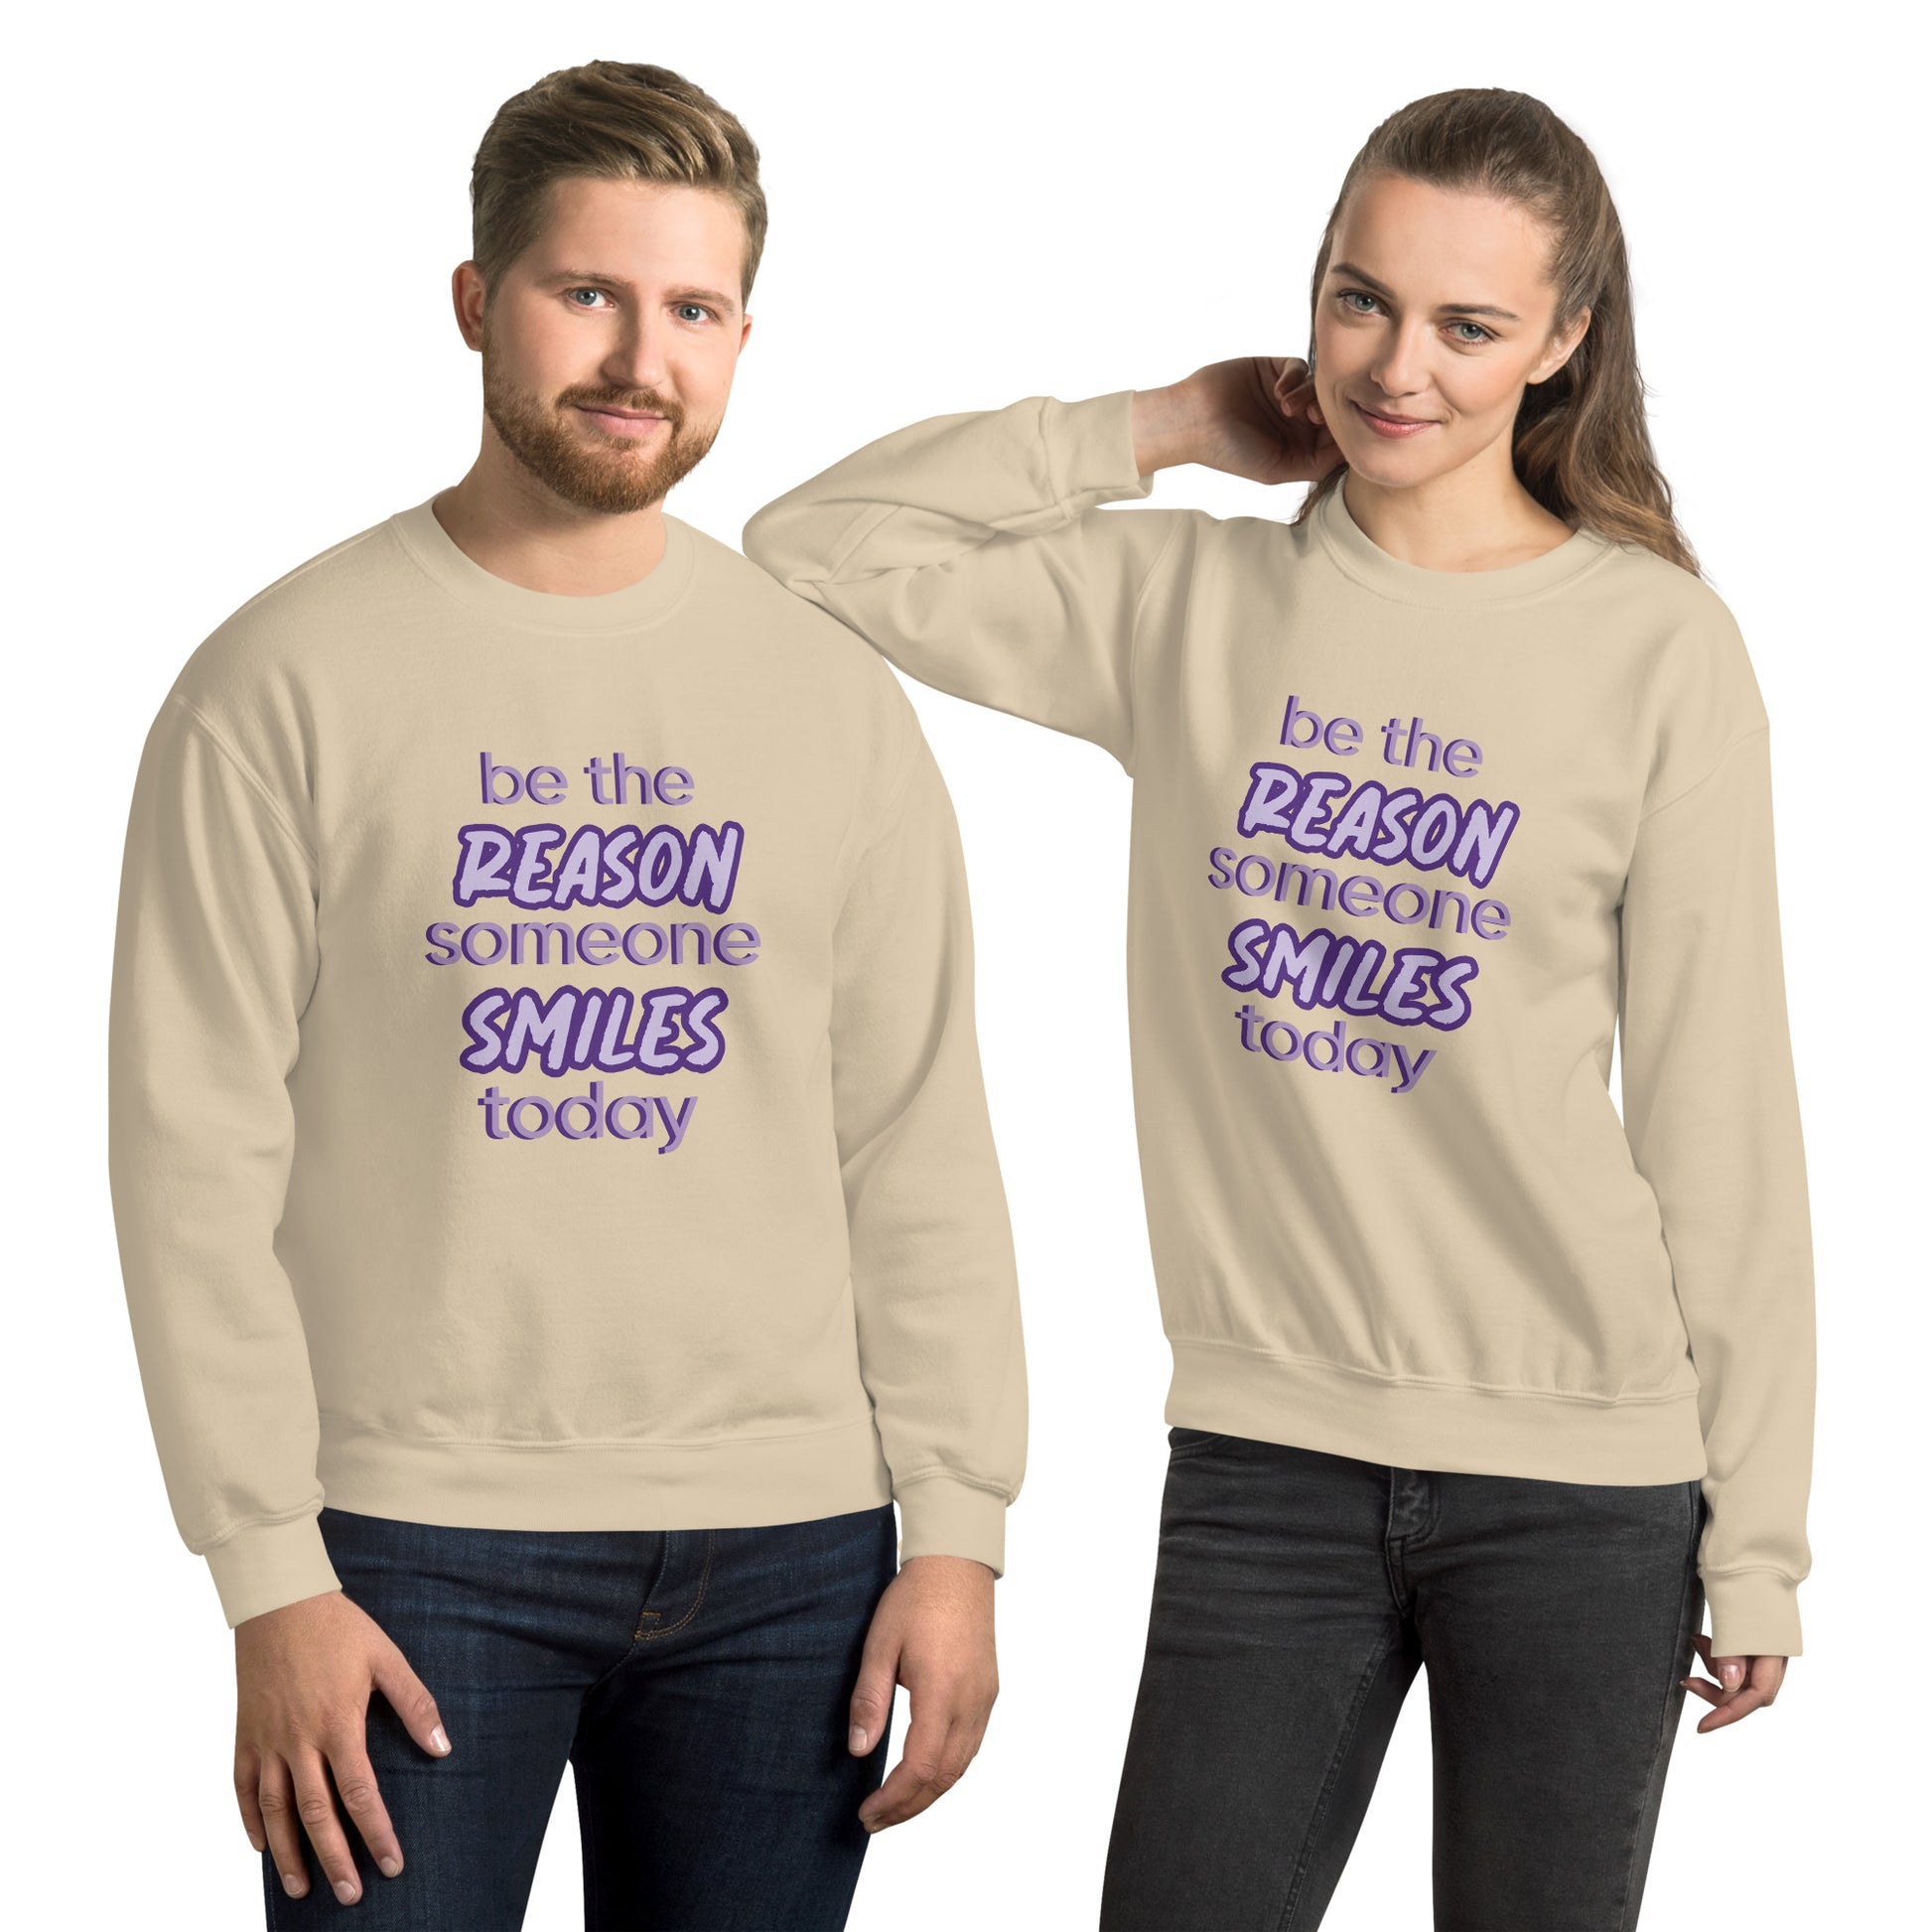 Men and women with sand sweatershirt and the quote "be the reason someone smiles today" in purple on it. 